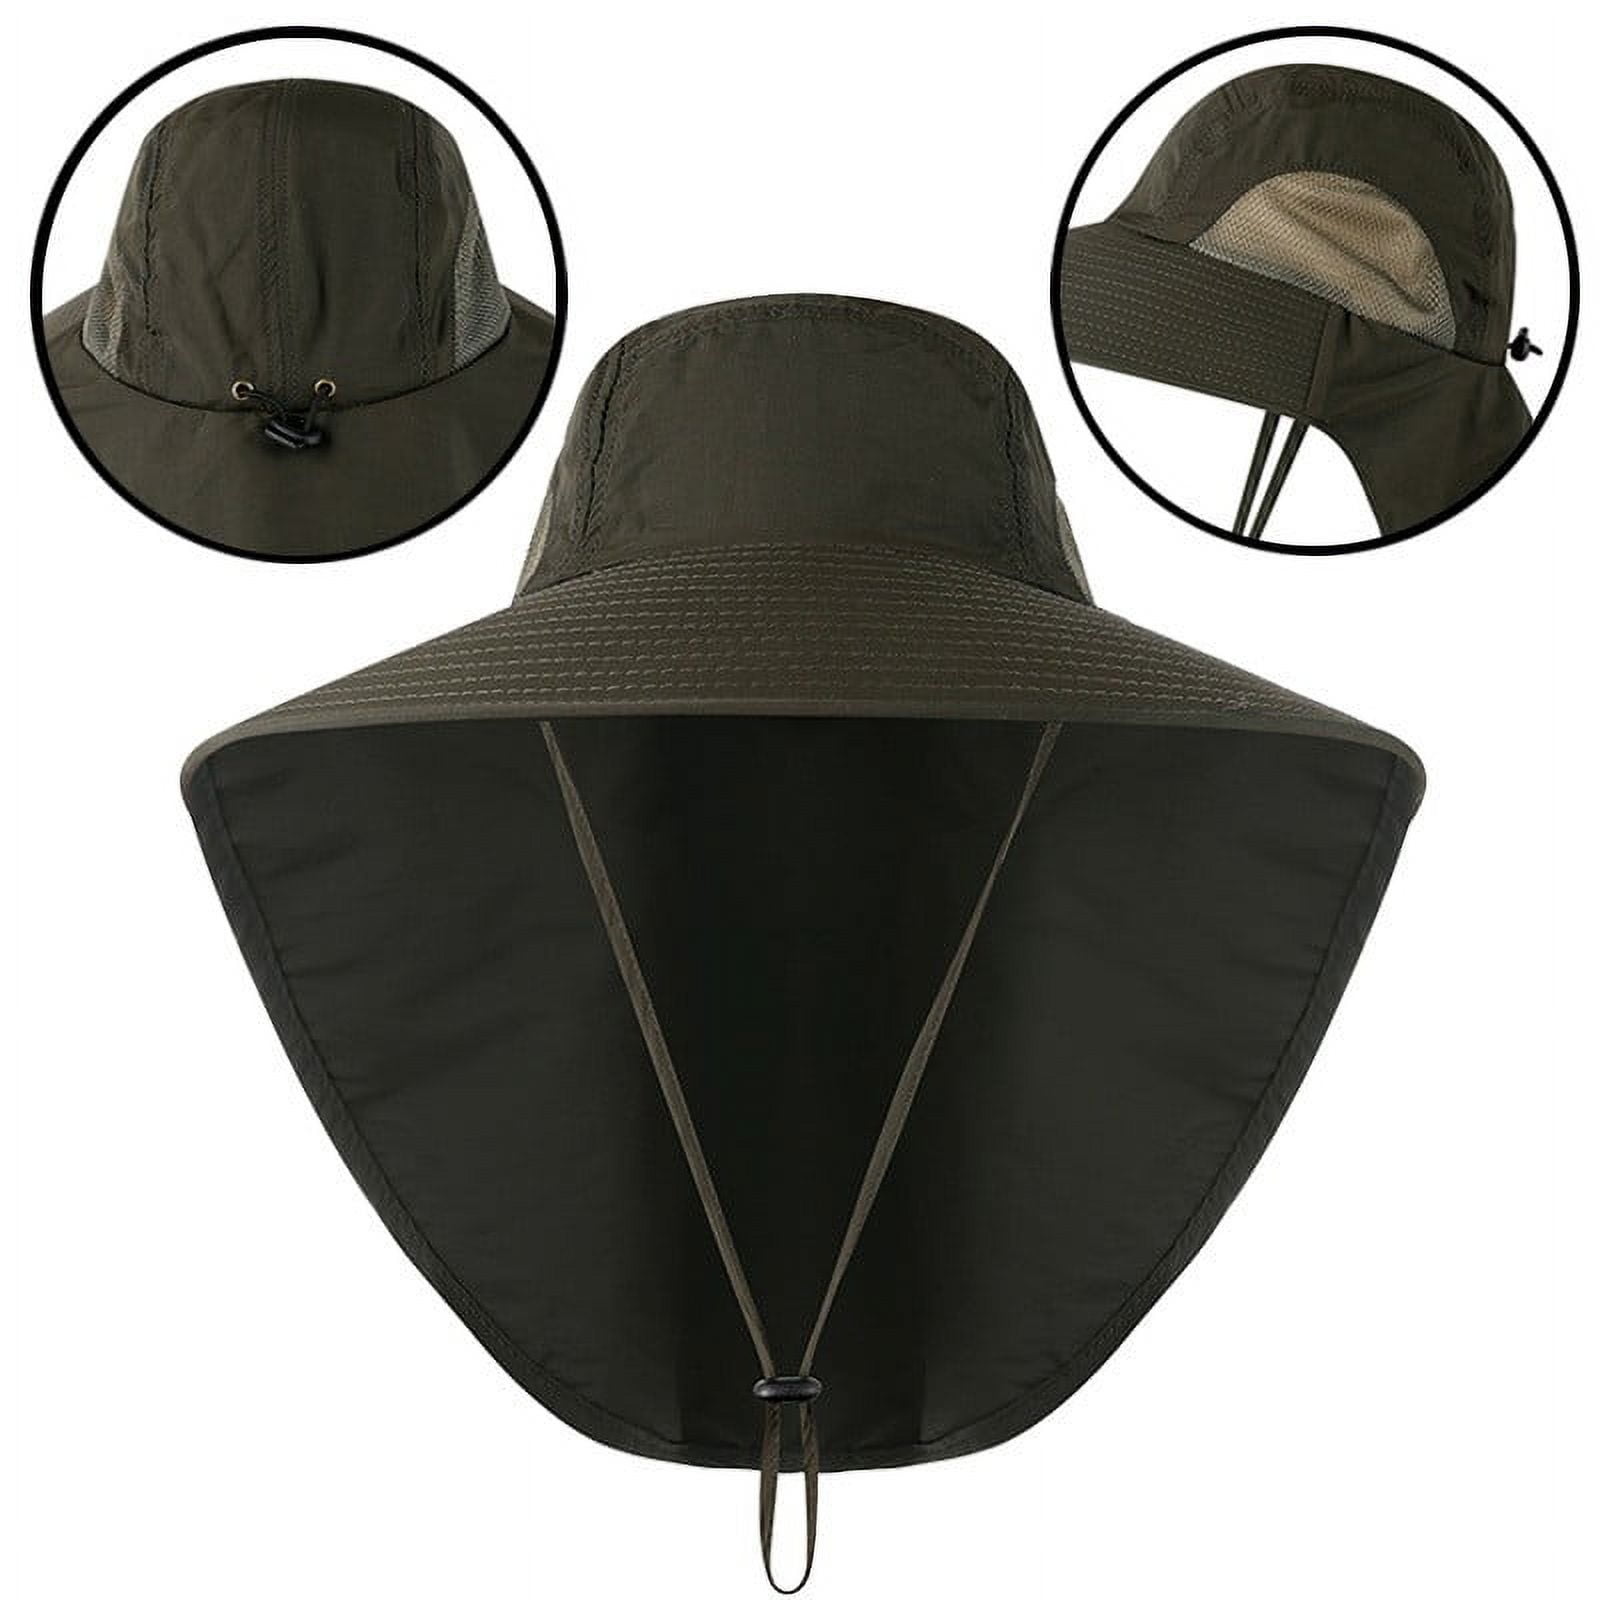 Travelwant Wide Brim Sun Hat with Neck Flap, UPF 50+ Hiking Safari Fishing  Caps for Men and Women 